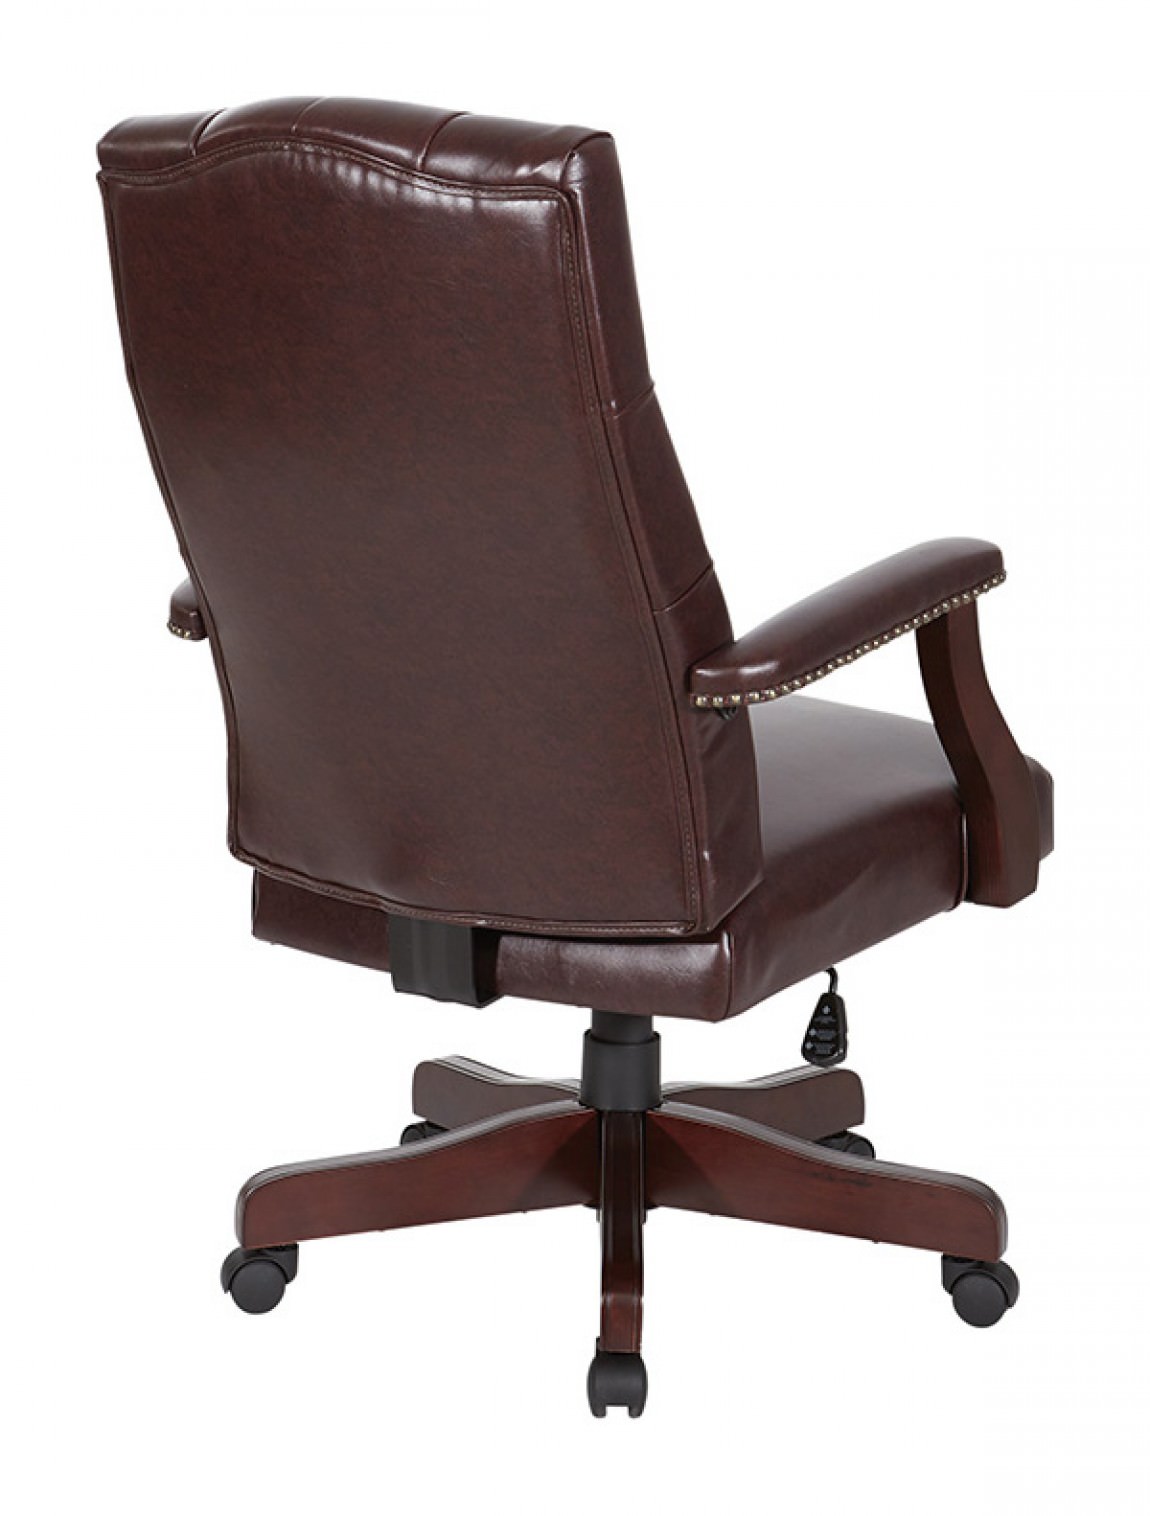 Executive High Back Chair | Work Smart by Office Star Products